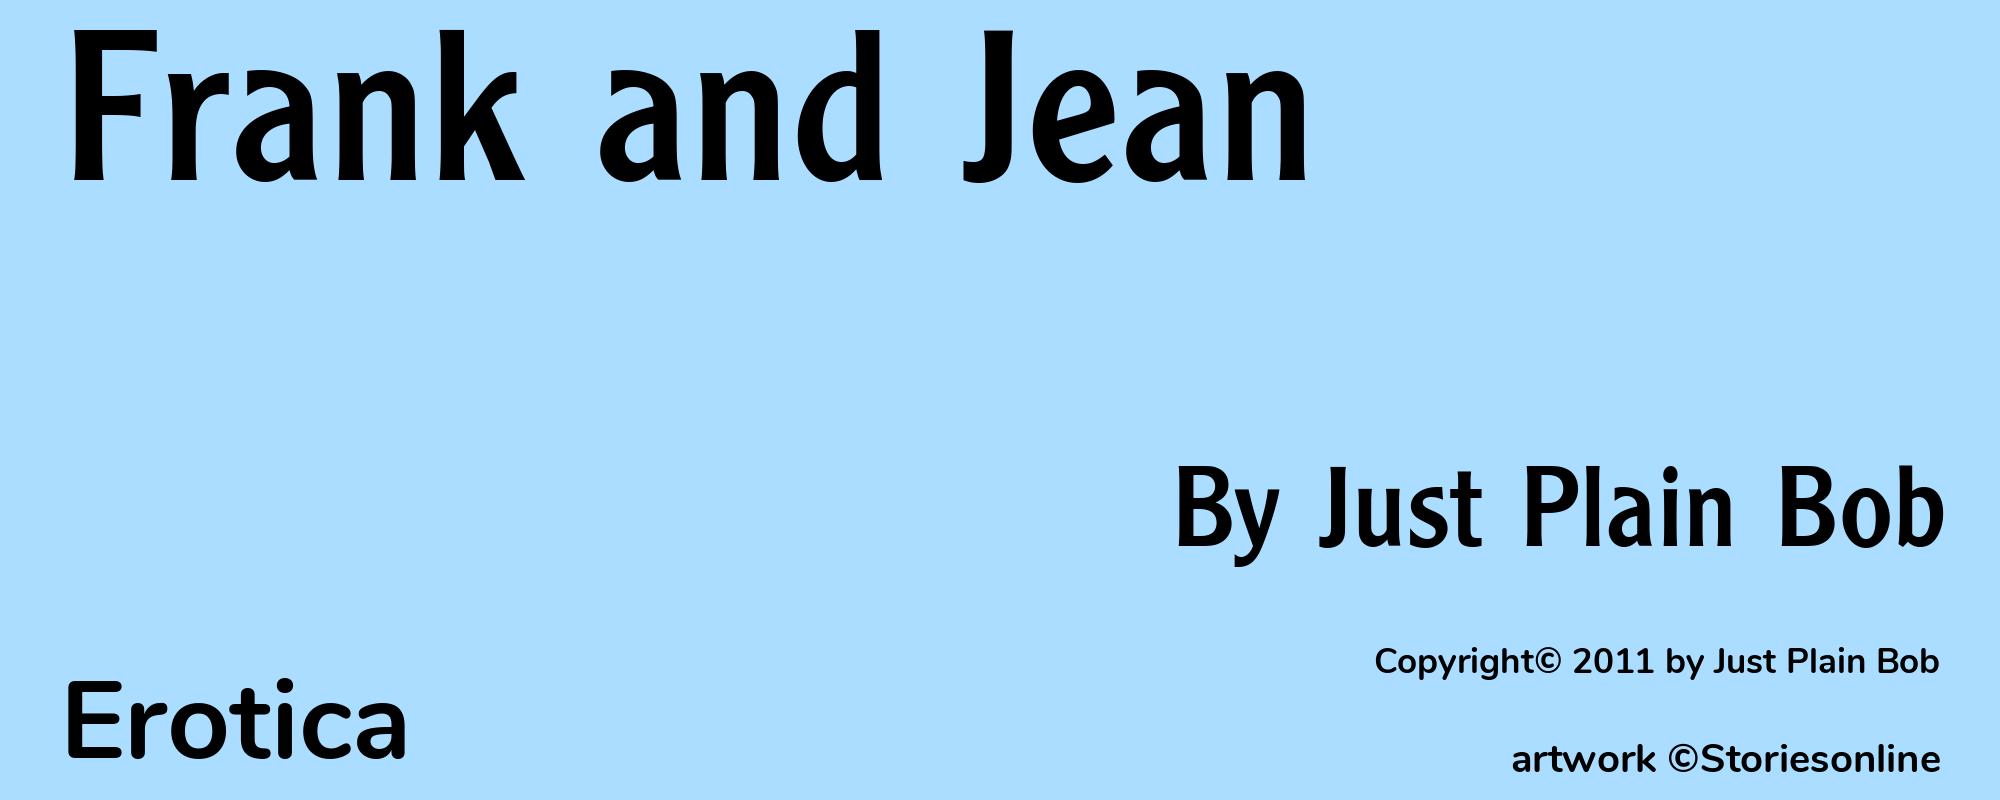 Frank and Jean - Cover